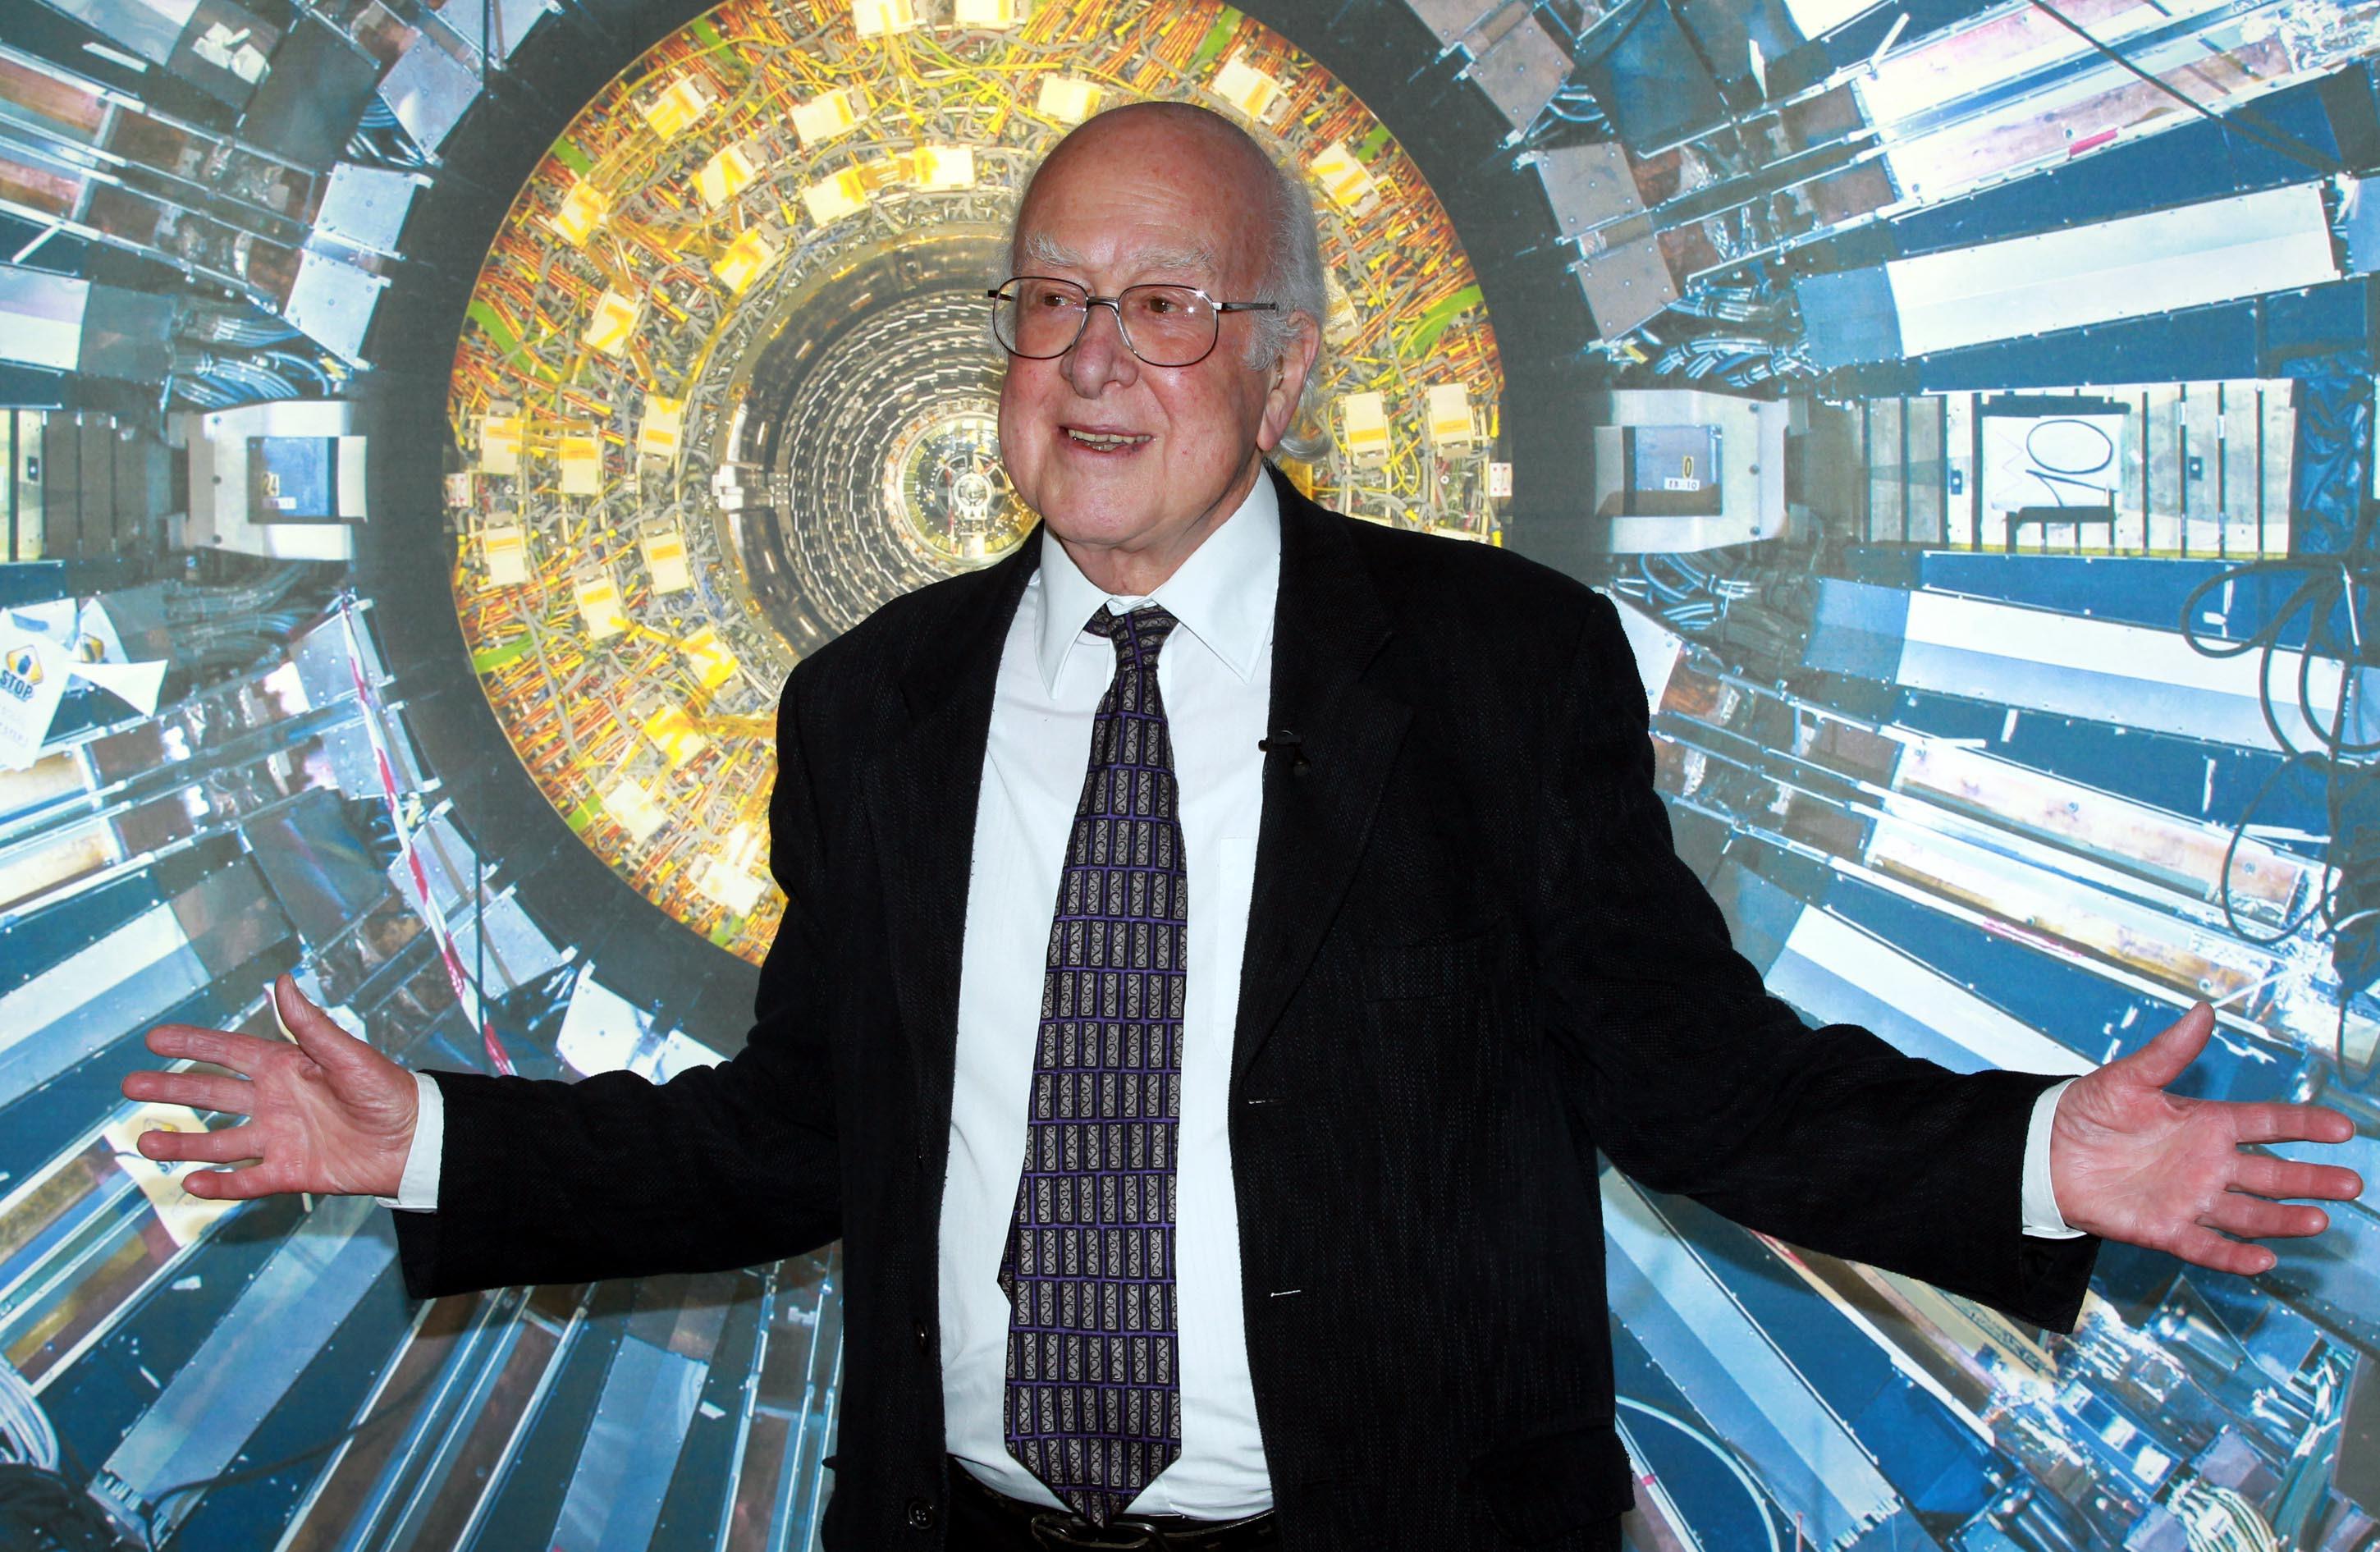 Peter Higgs, the Nobel Prize winner in physics who discovered the 'God particle', has died, aged 94